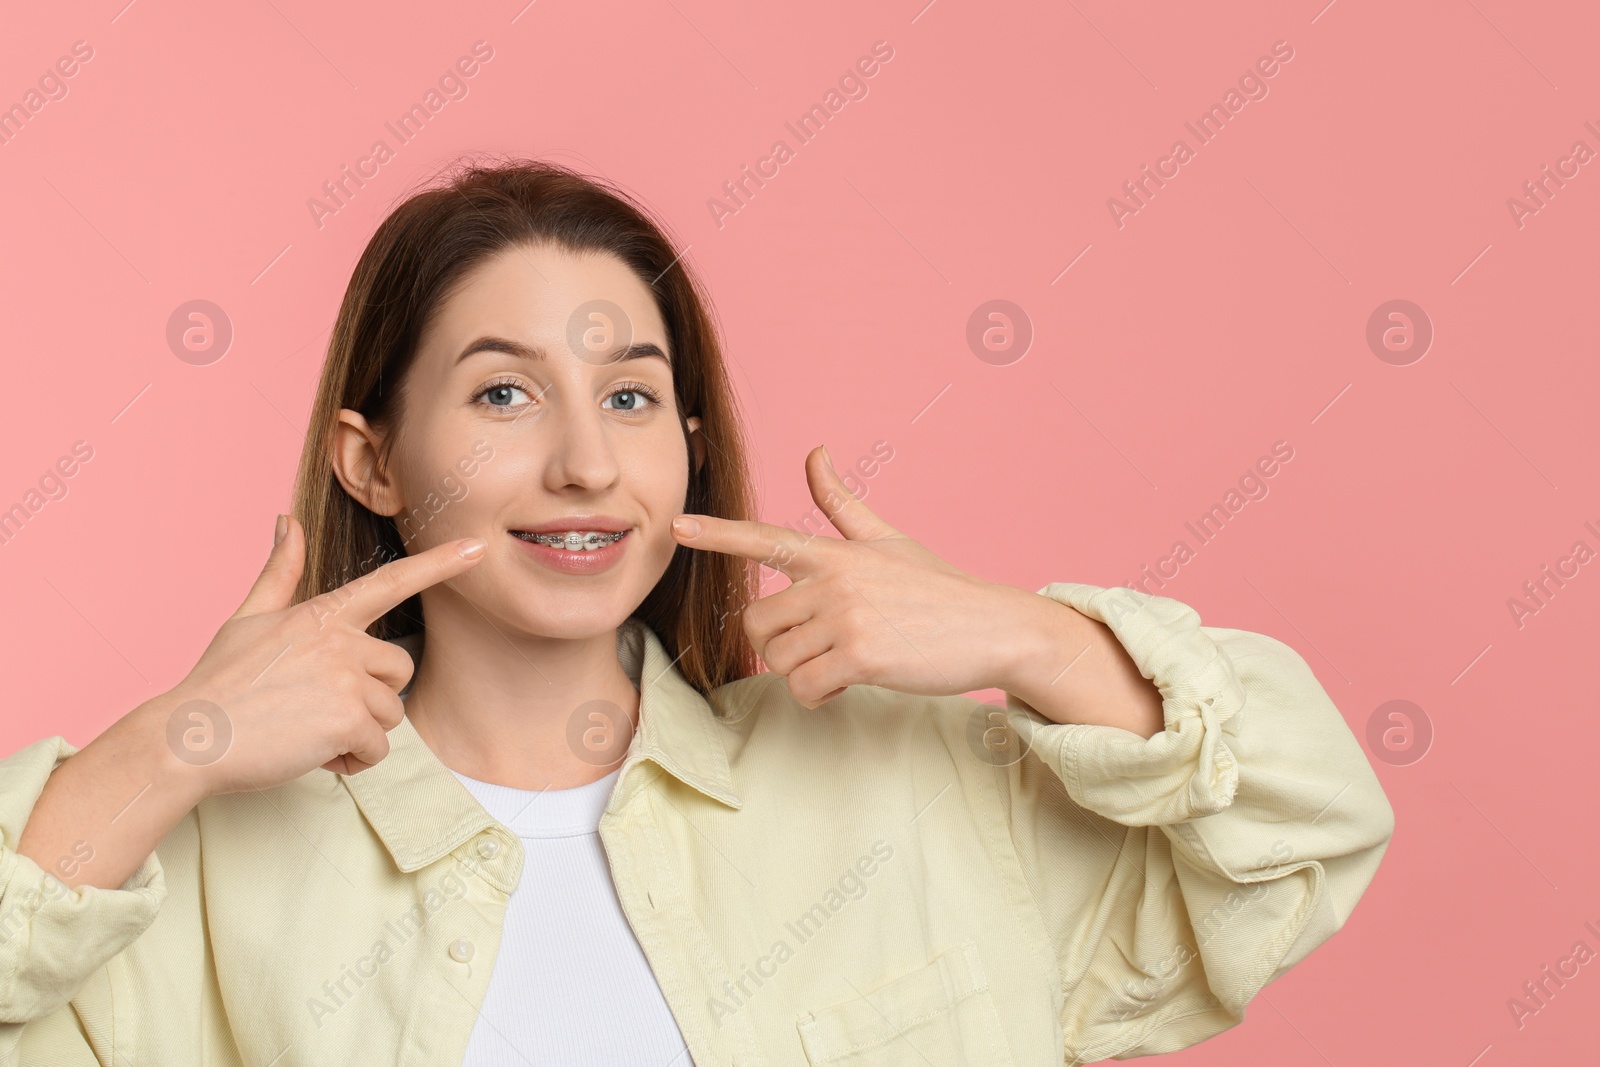 Photo of Portrait of smiling woman pointing at her dental braces on pink background